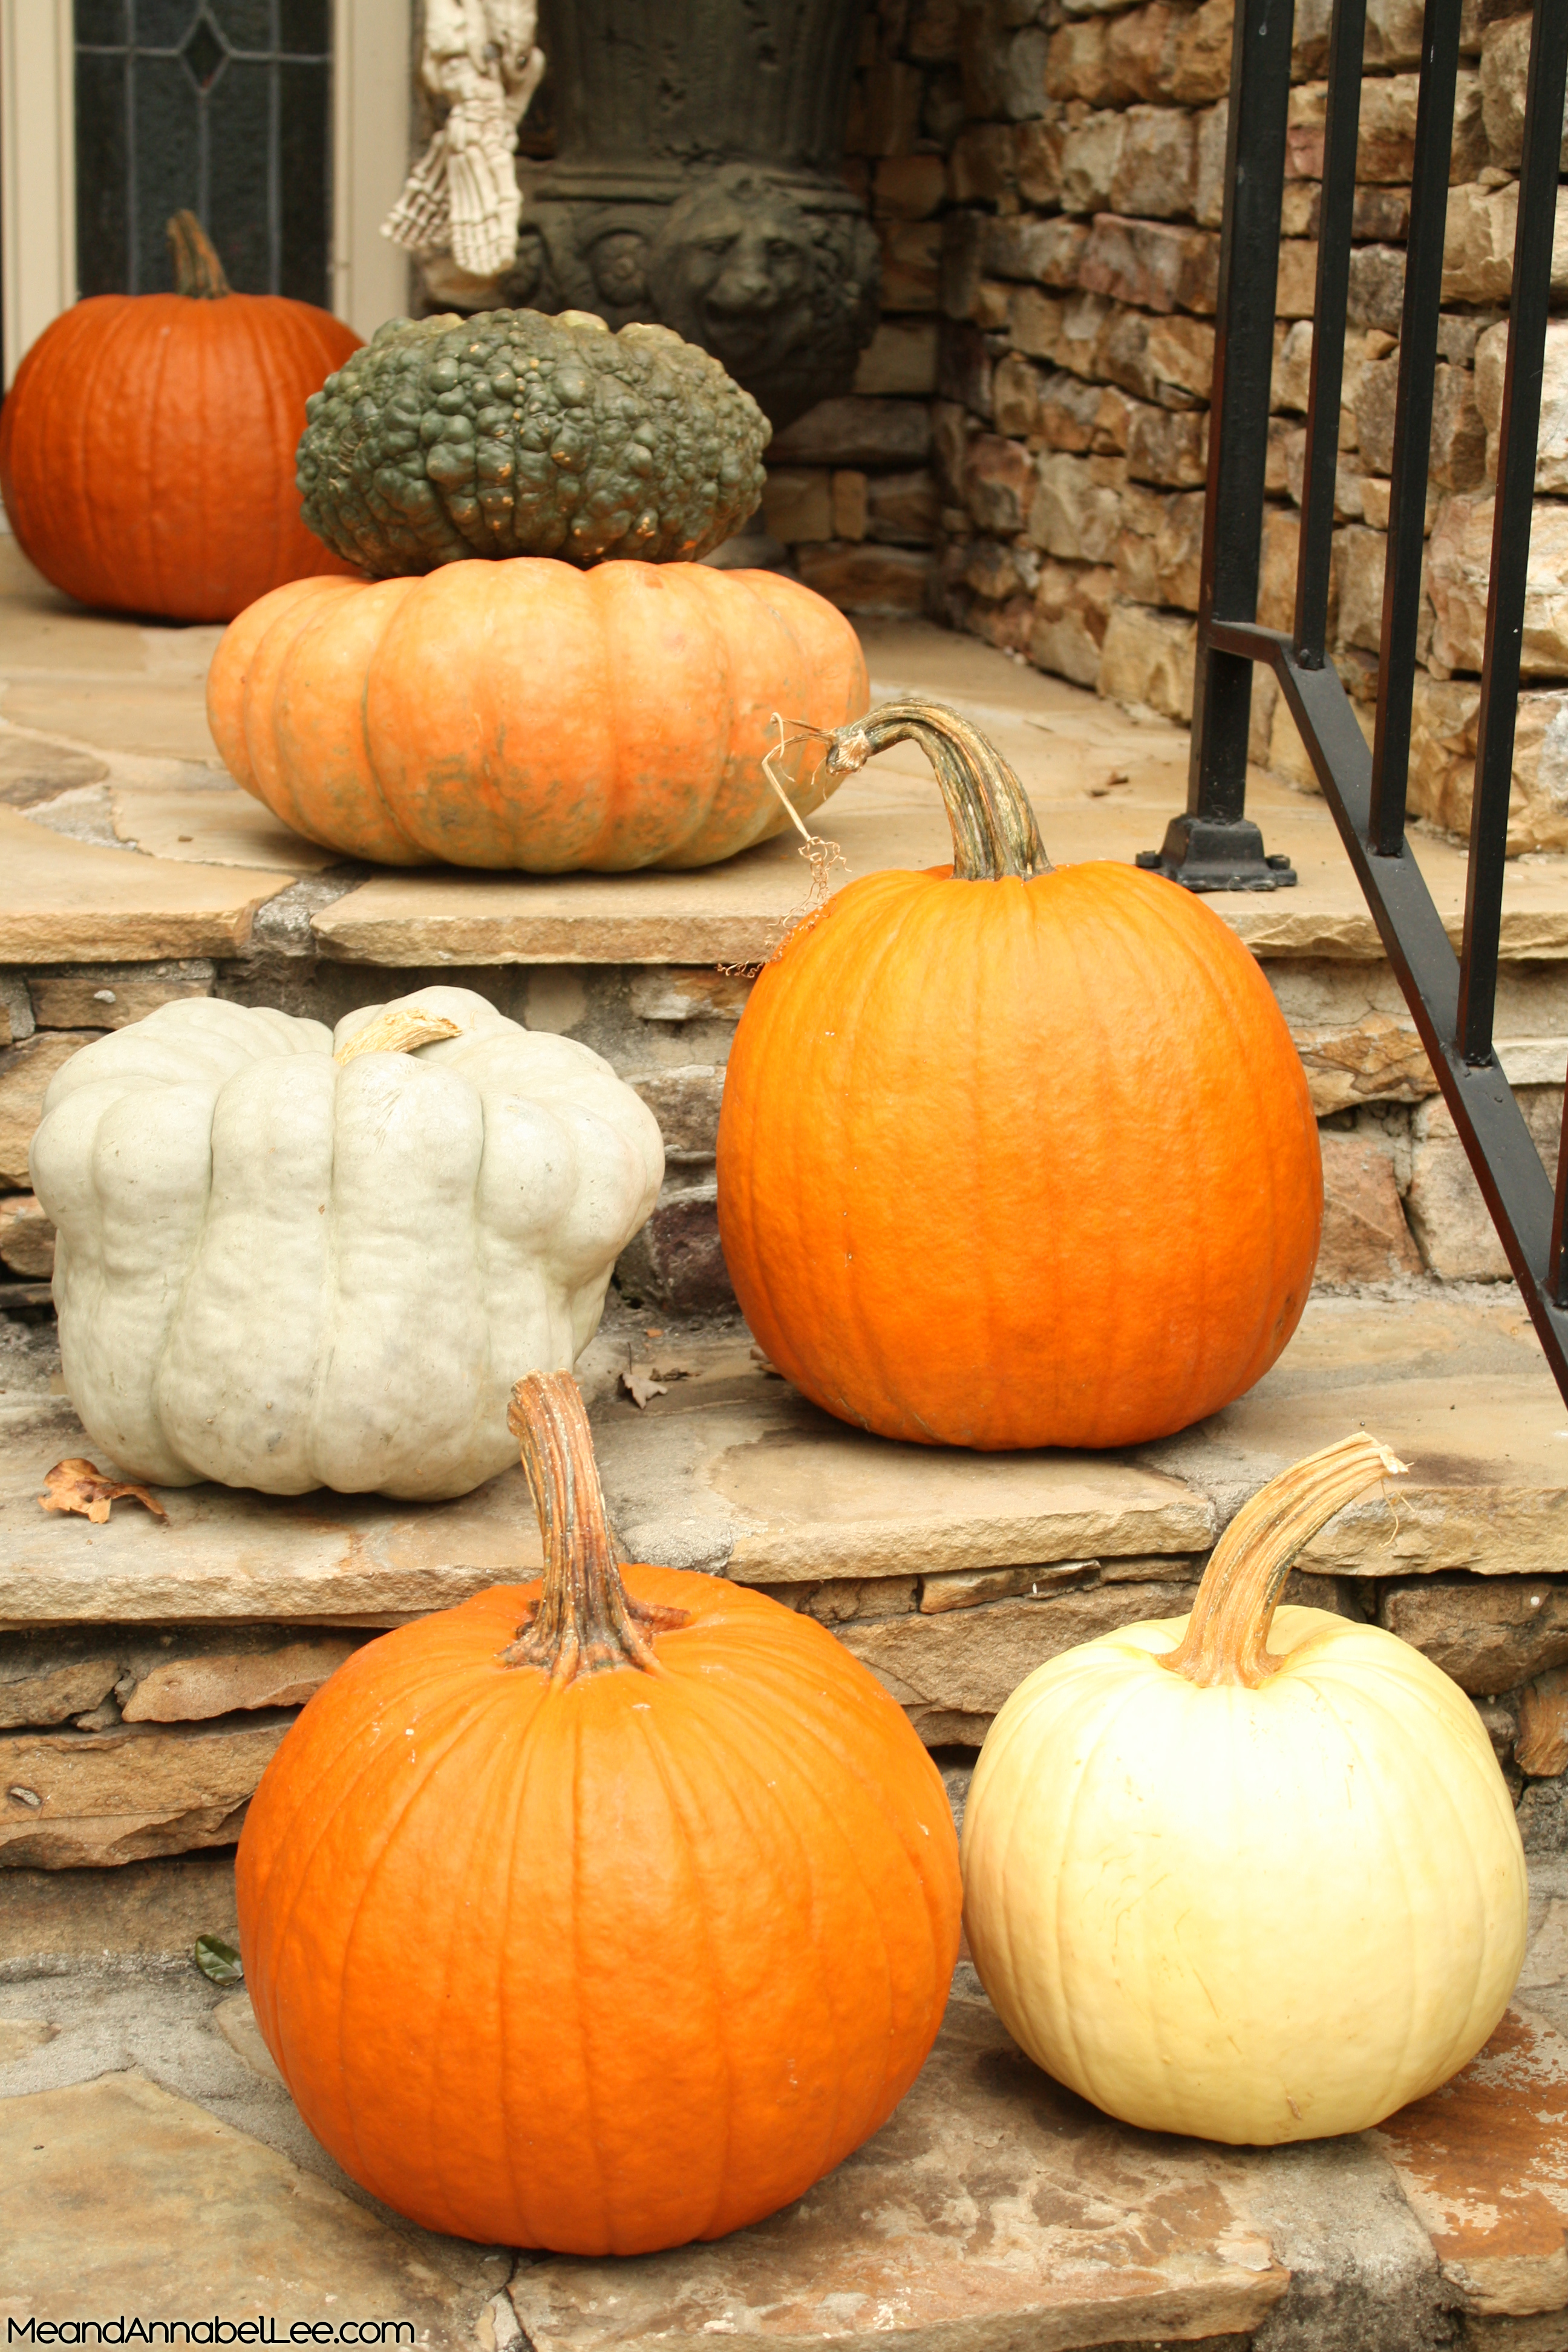 Halloween Front Entry Decor - Line your steps with Pumpkins in all shapes, sizes, & colors - traditional and heirloom - www.MeandAnnabelLee.com